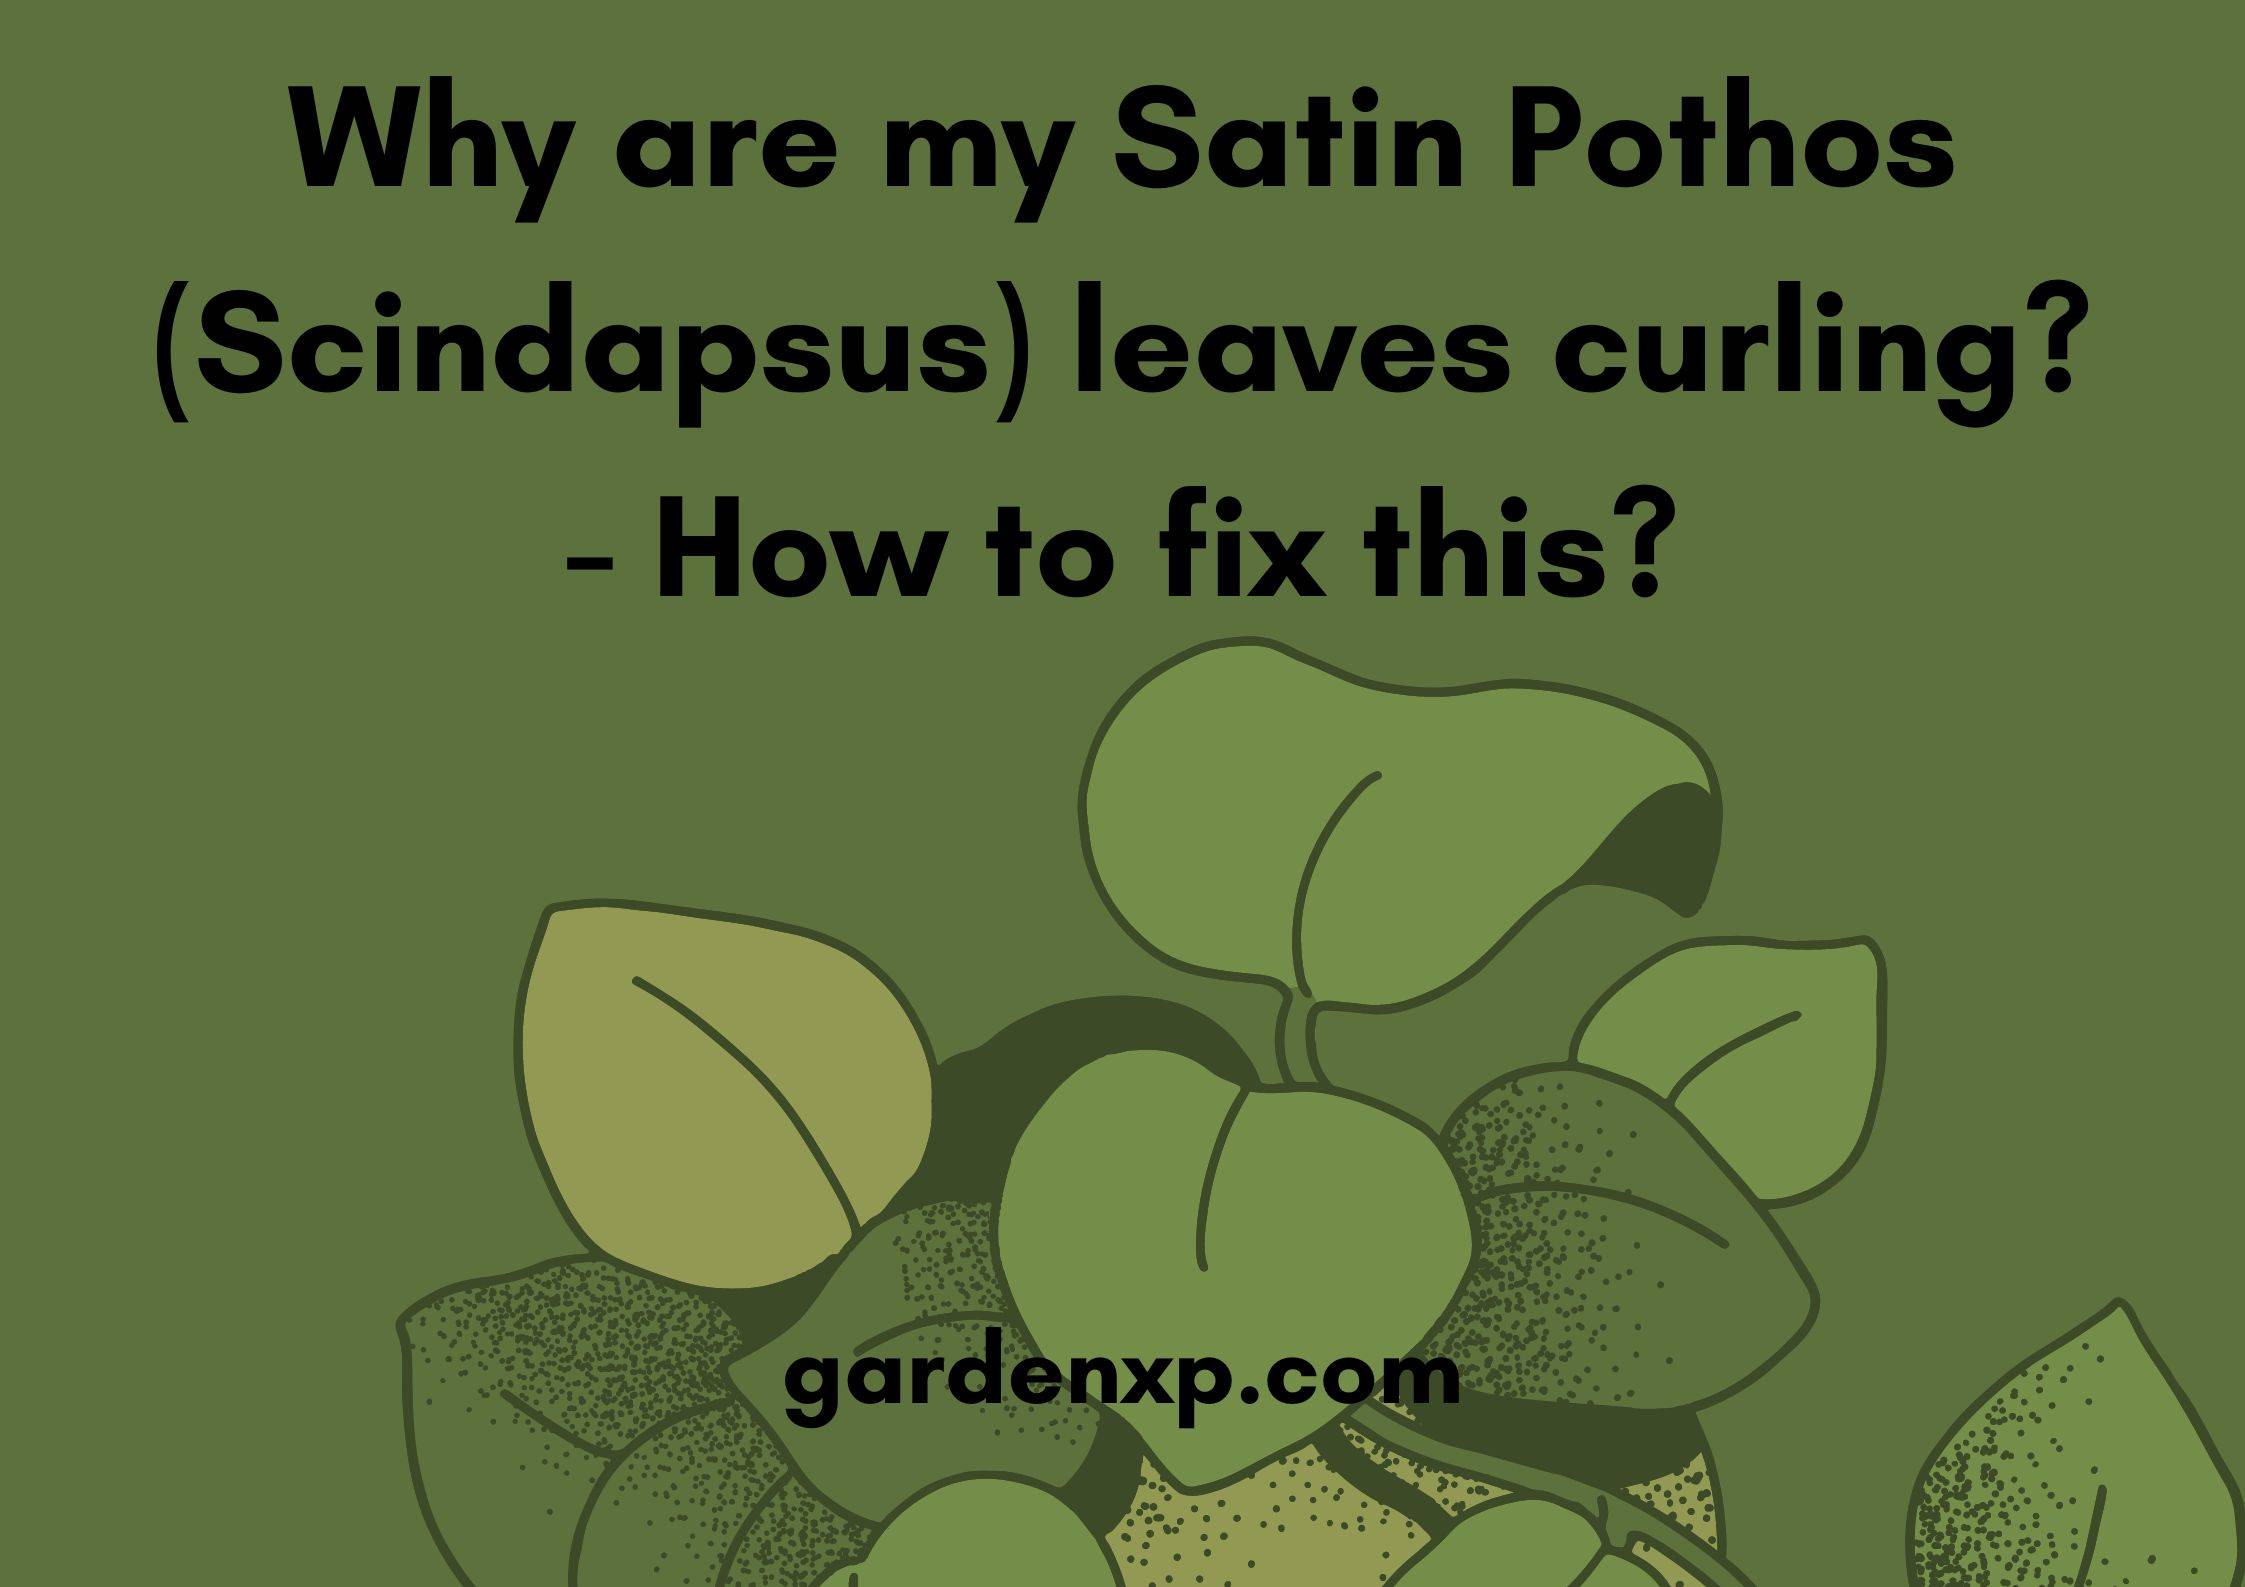 Why are my Satin Pothos (Scindapsus) leaves curling? - How to fix this?